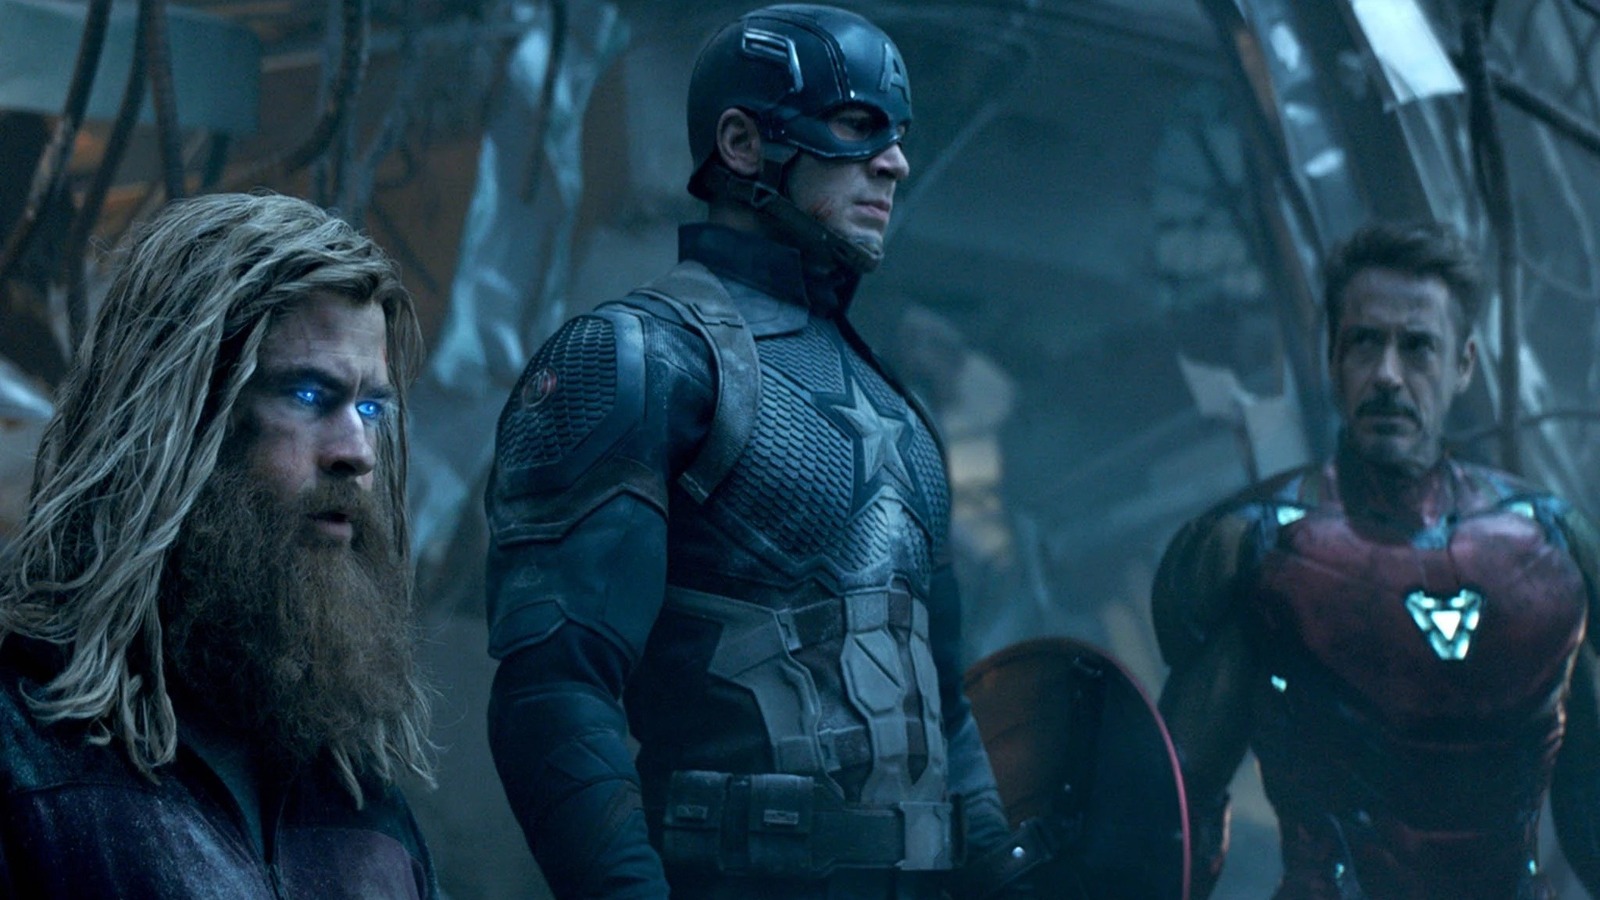 #Kevin Feige Nearly Killed Even More Heroes In Avengers: Endgame